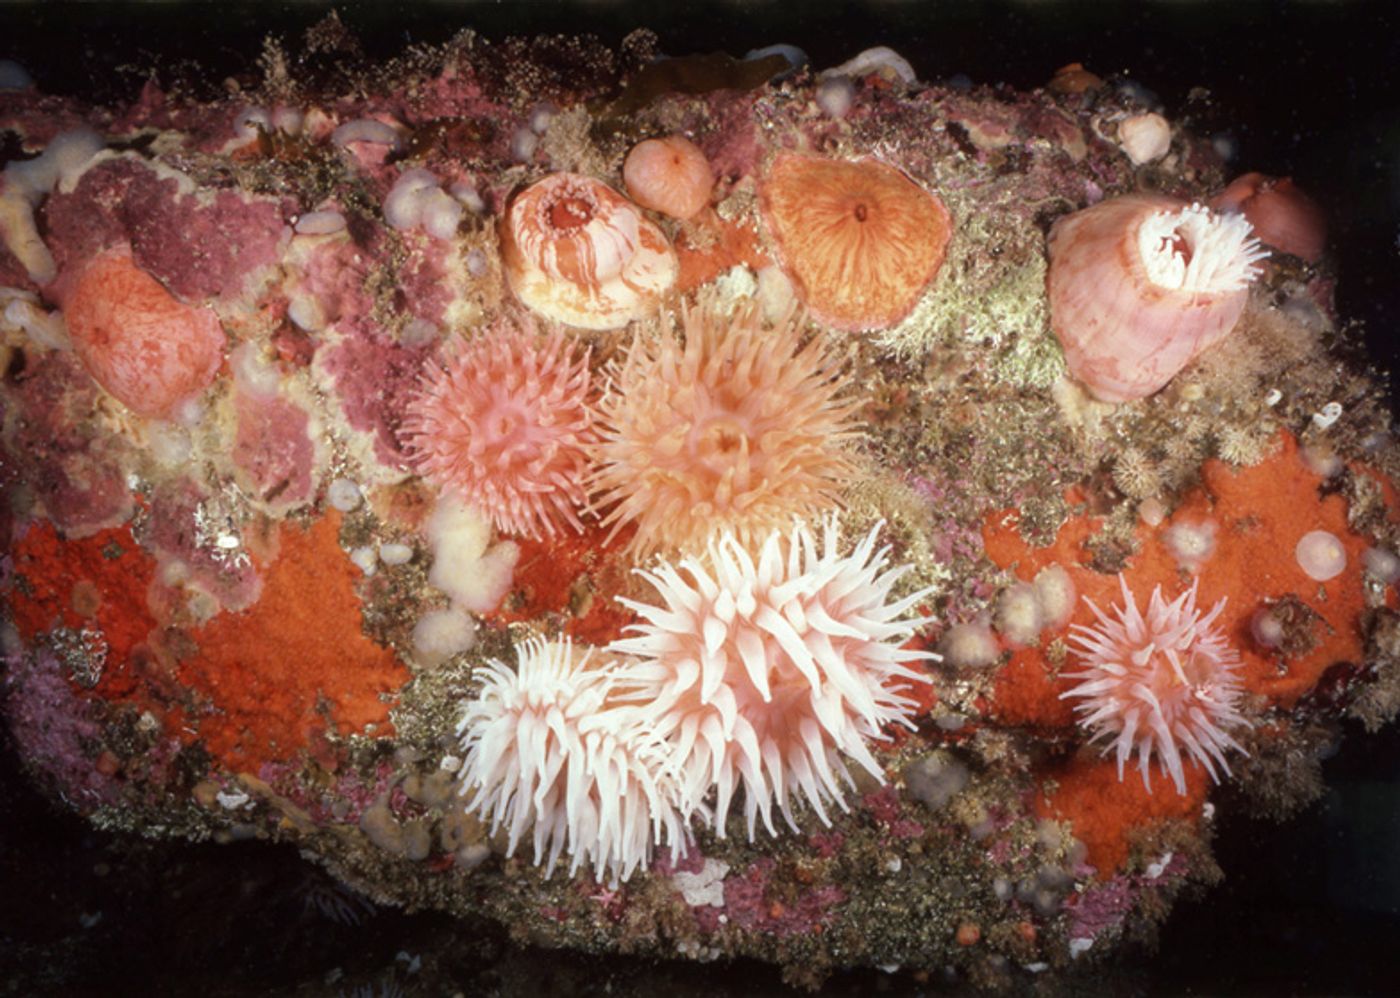 The white tentacled sea anemone shown here would take more than 200 years to bounce back from disturbance like bottom trawling. Photo: Jon Witman, Earthjustice